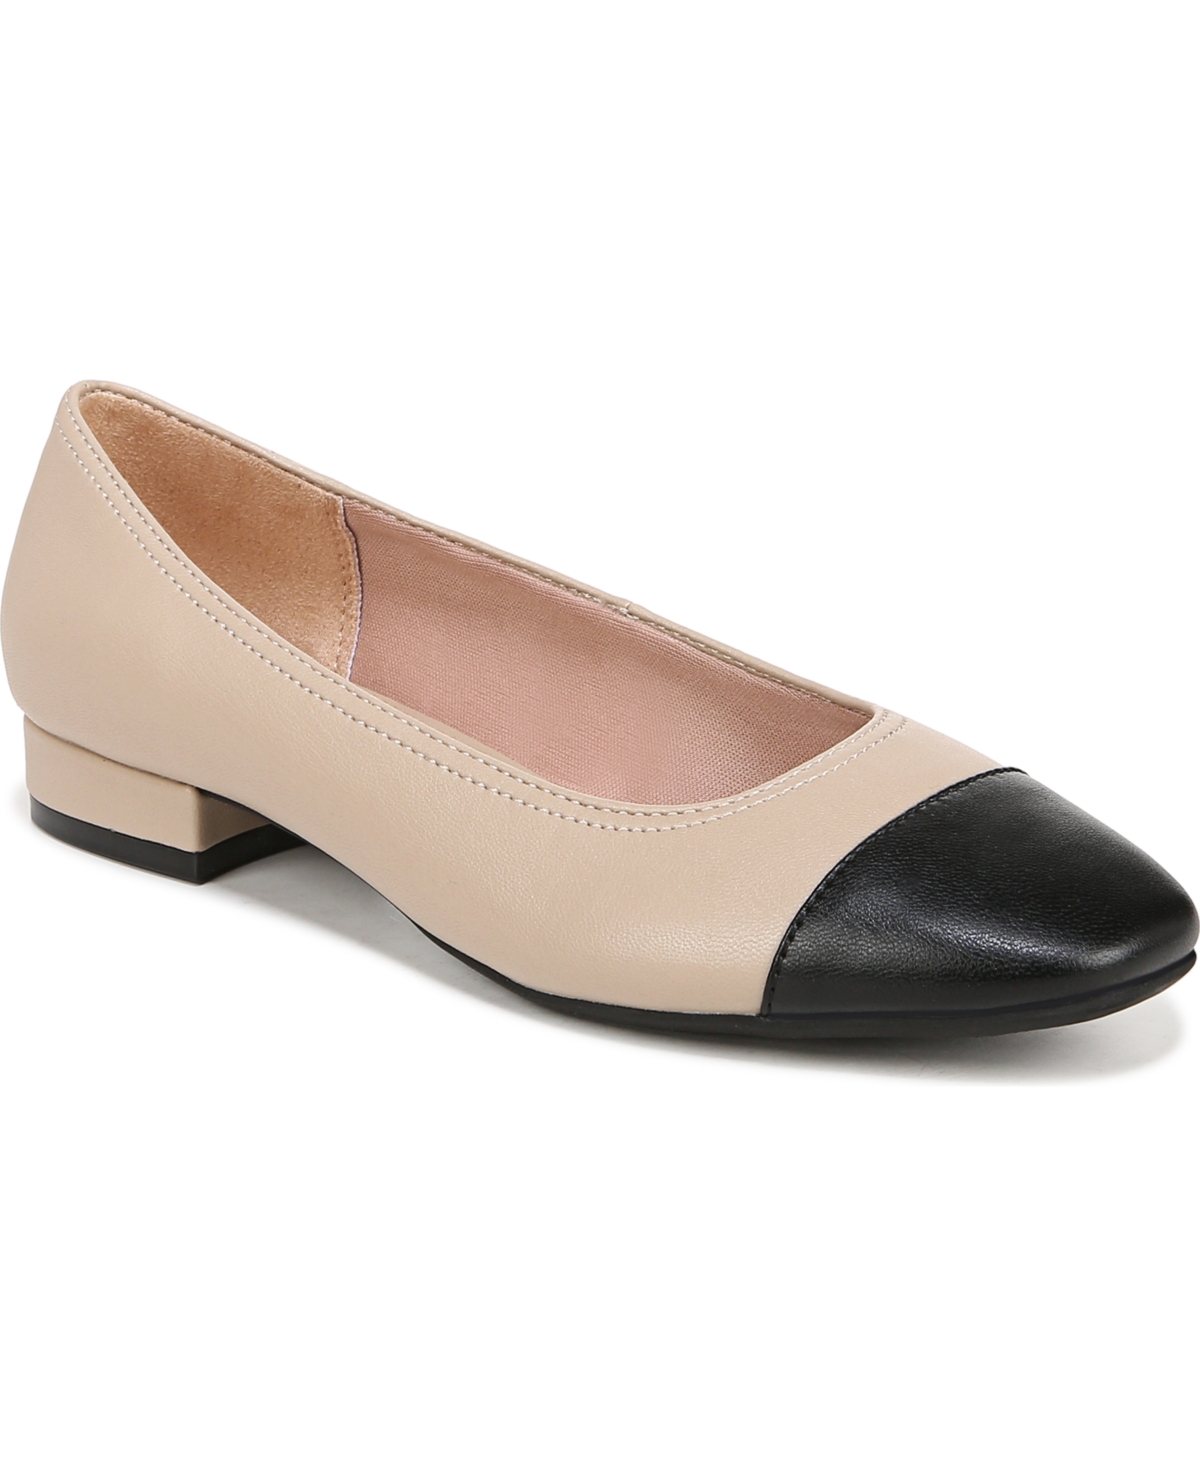 Women's Cameo 3 Ballet Flats - Black/Taupe Faux Leather